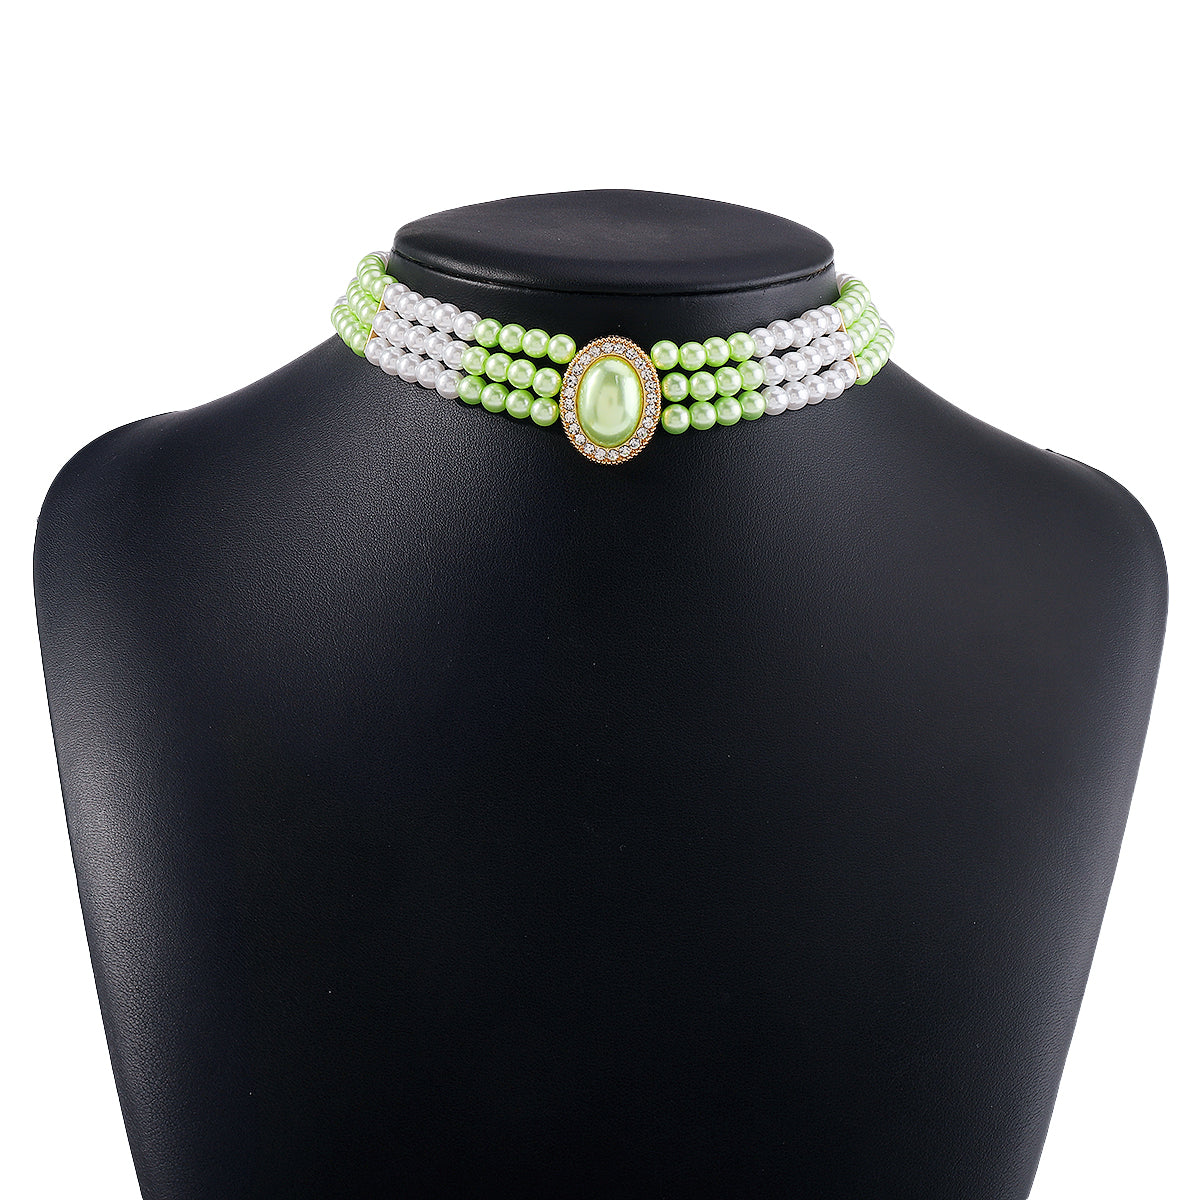 Light Green Pearl & Cubic Zirconia 18K Gold-Plated Oval Layered Choker Necklace